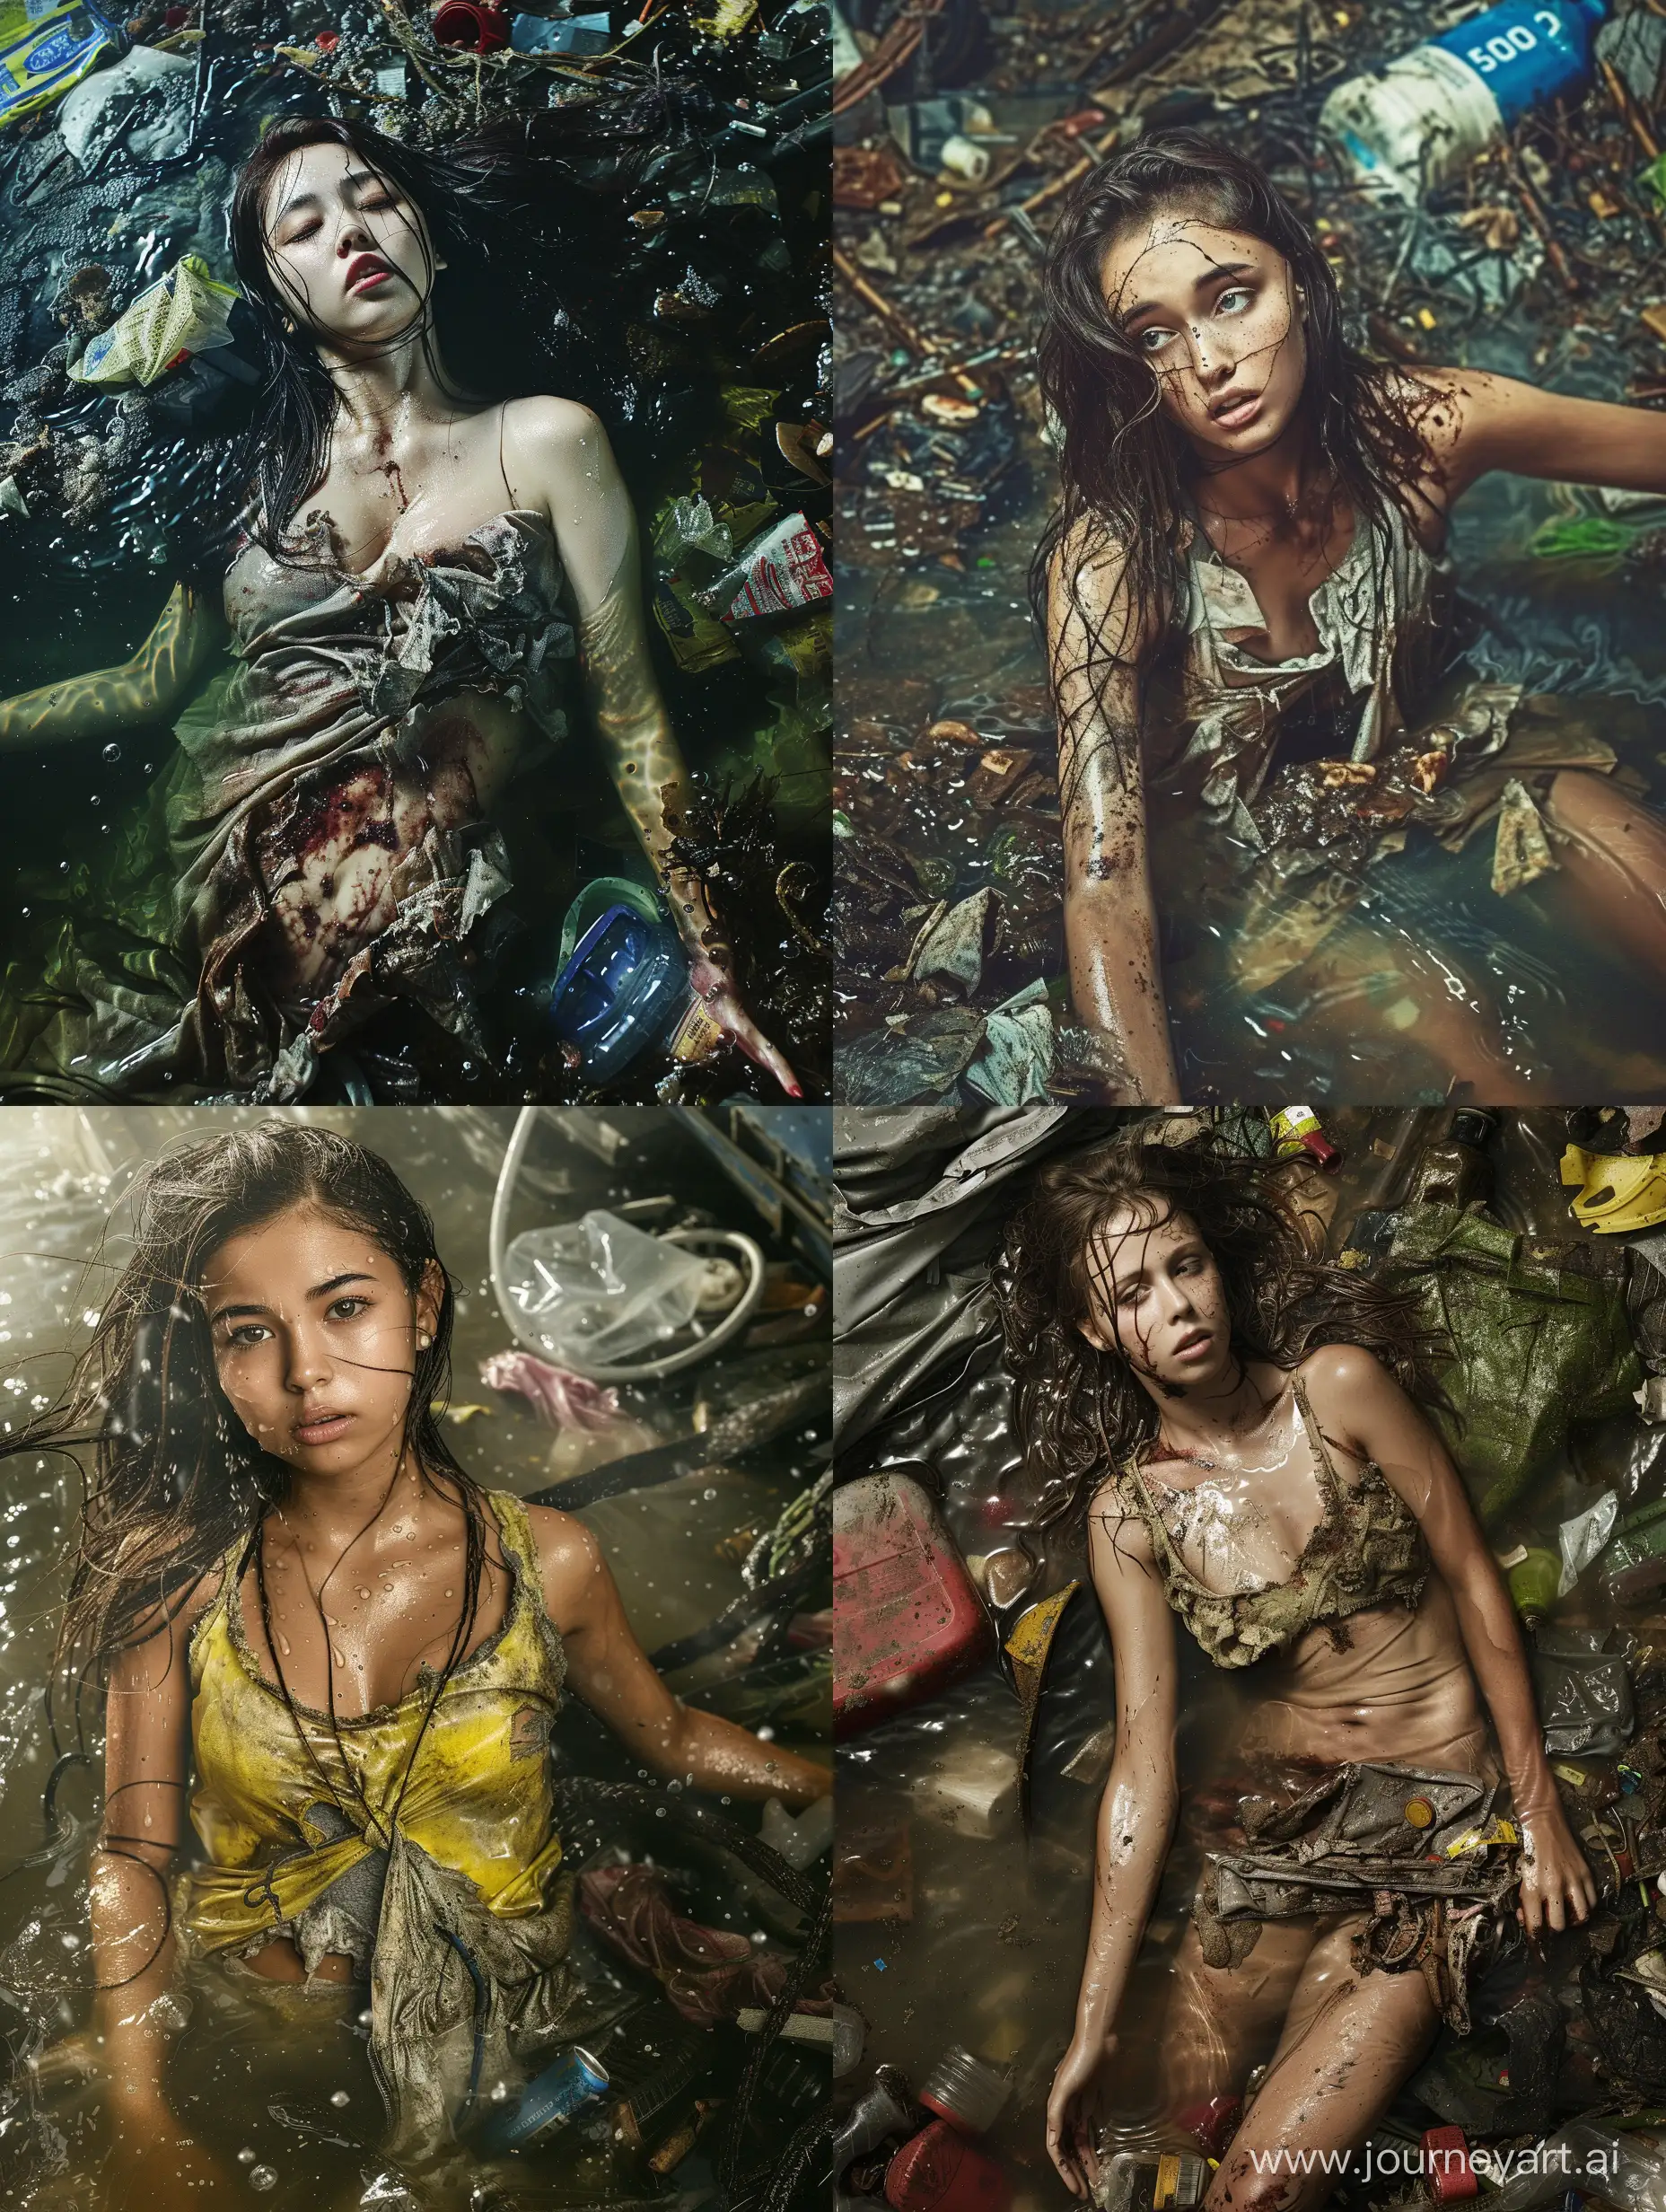 a cover photography, body and face photo, a beautiful young woman covered in water and liquid, clothes old and ragged, half buried on trash and garbage, hyper realistic, model photography, 500px poses, detailed, intricate